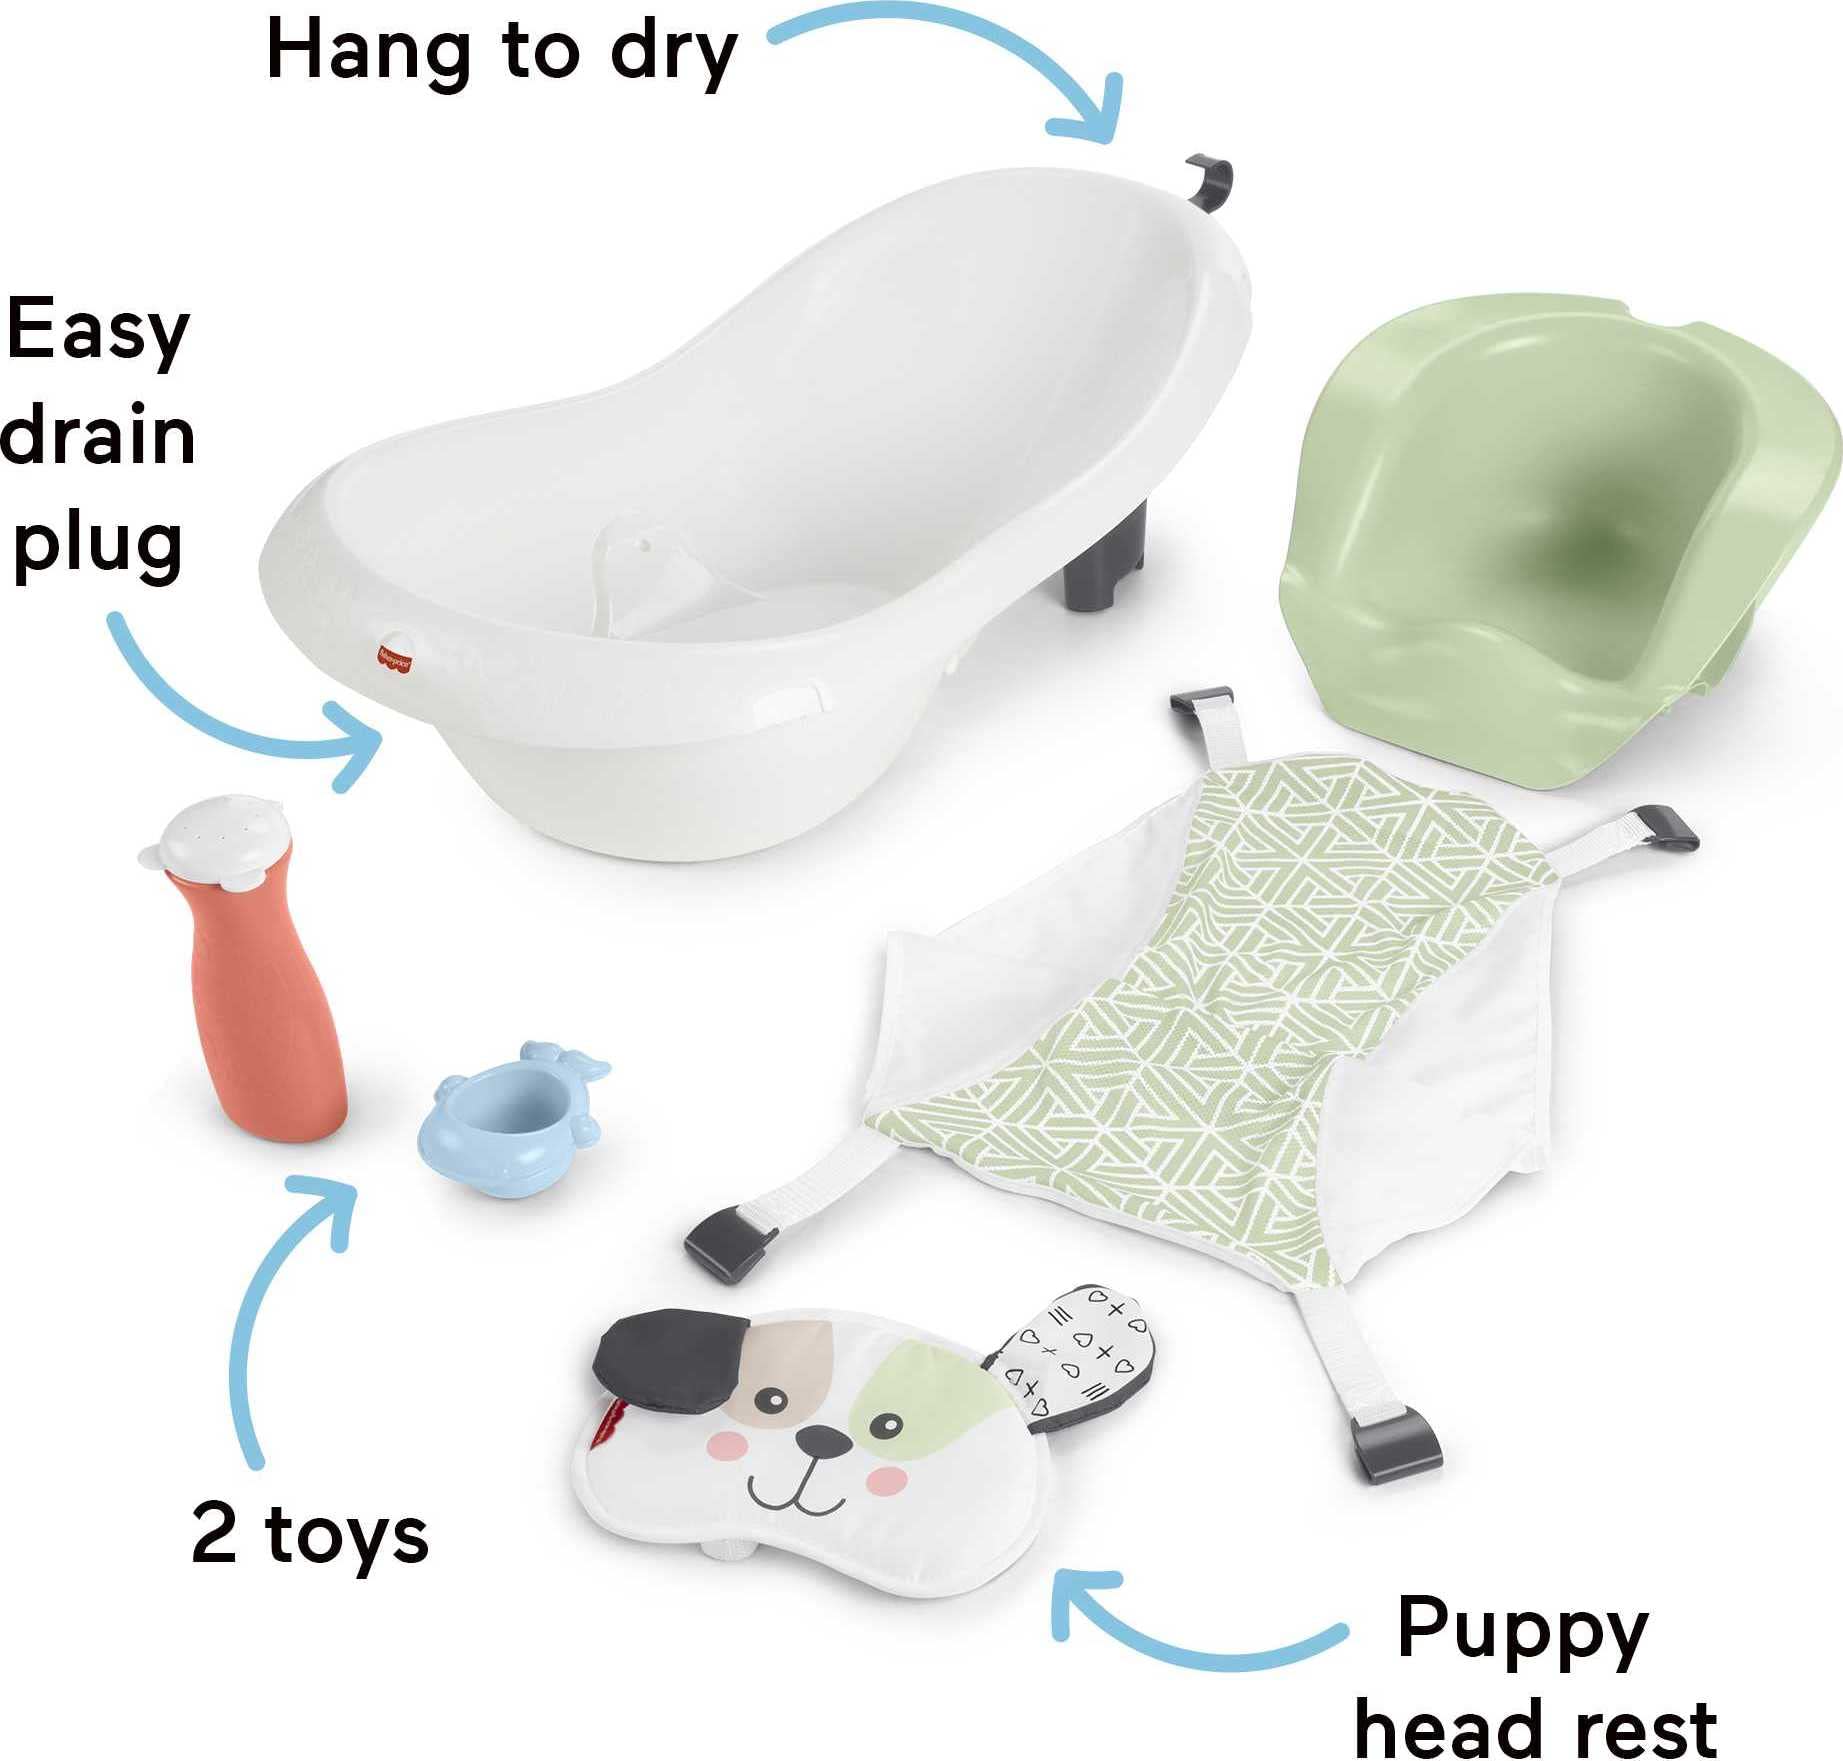 Fisher-Price Baby To Toddler Bath 4-In-1 Sling ‘N Seat Tub With Removable Infant Support And 2 Toys, Puppy Perfection